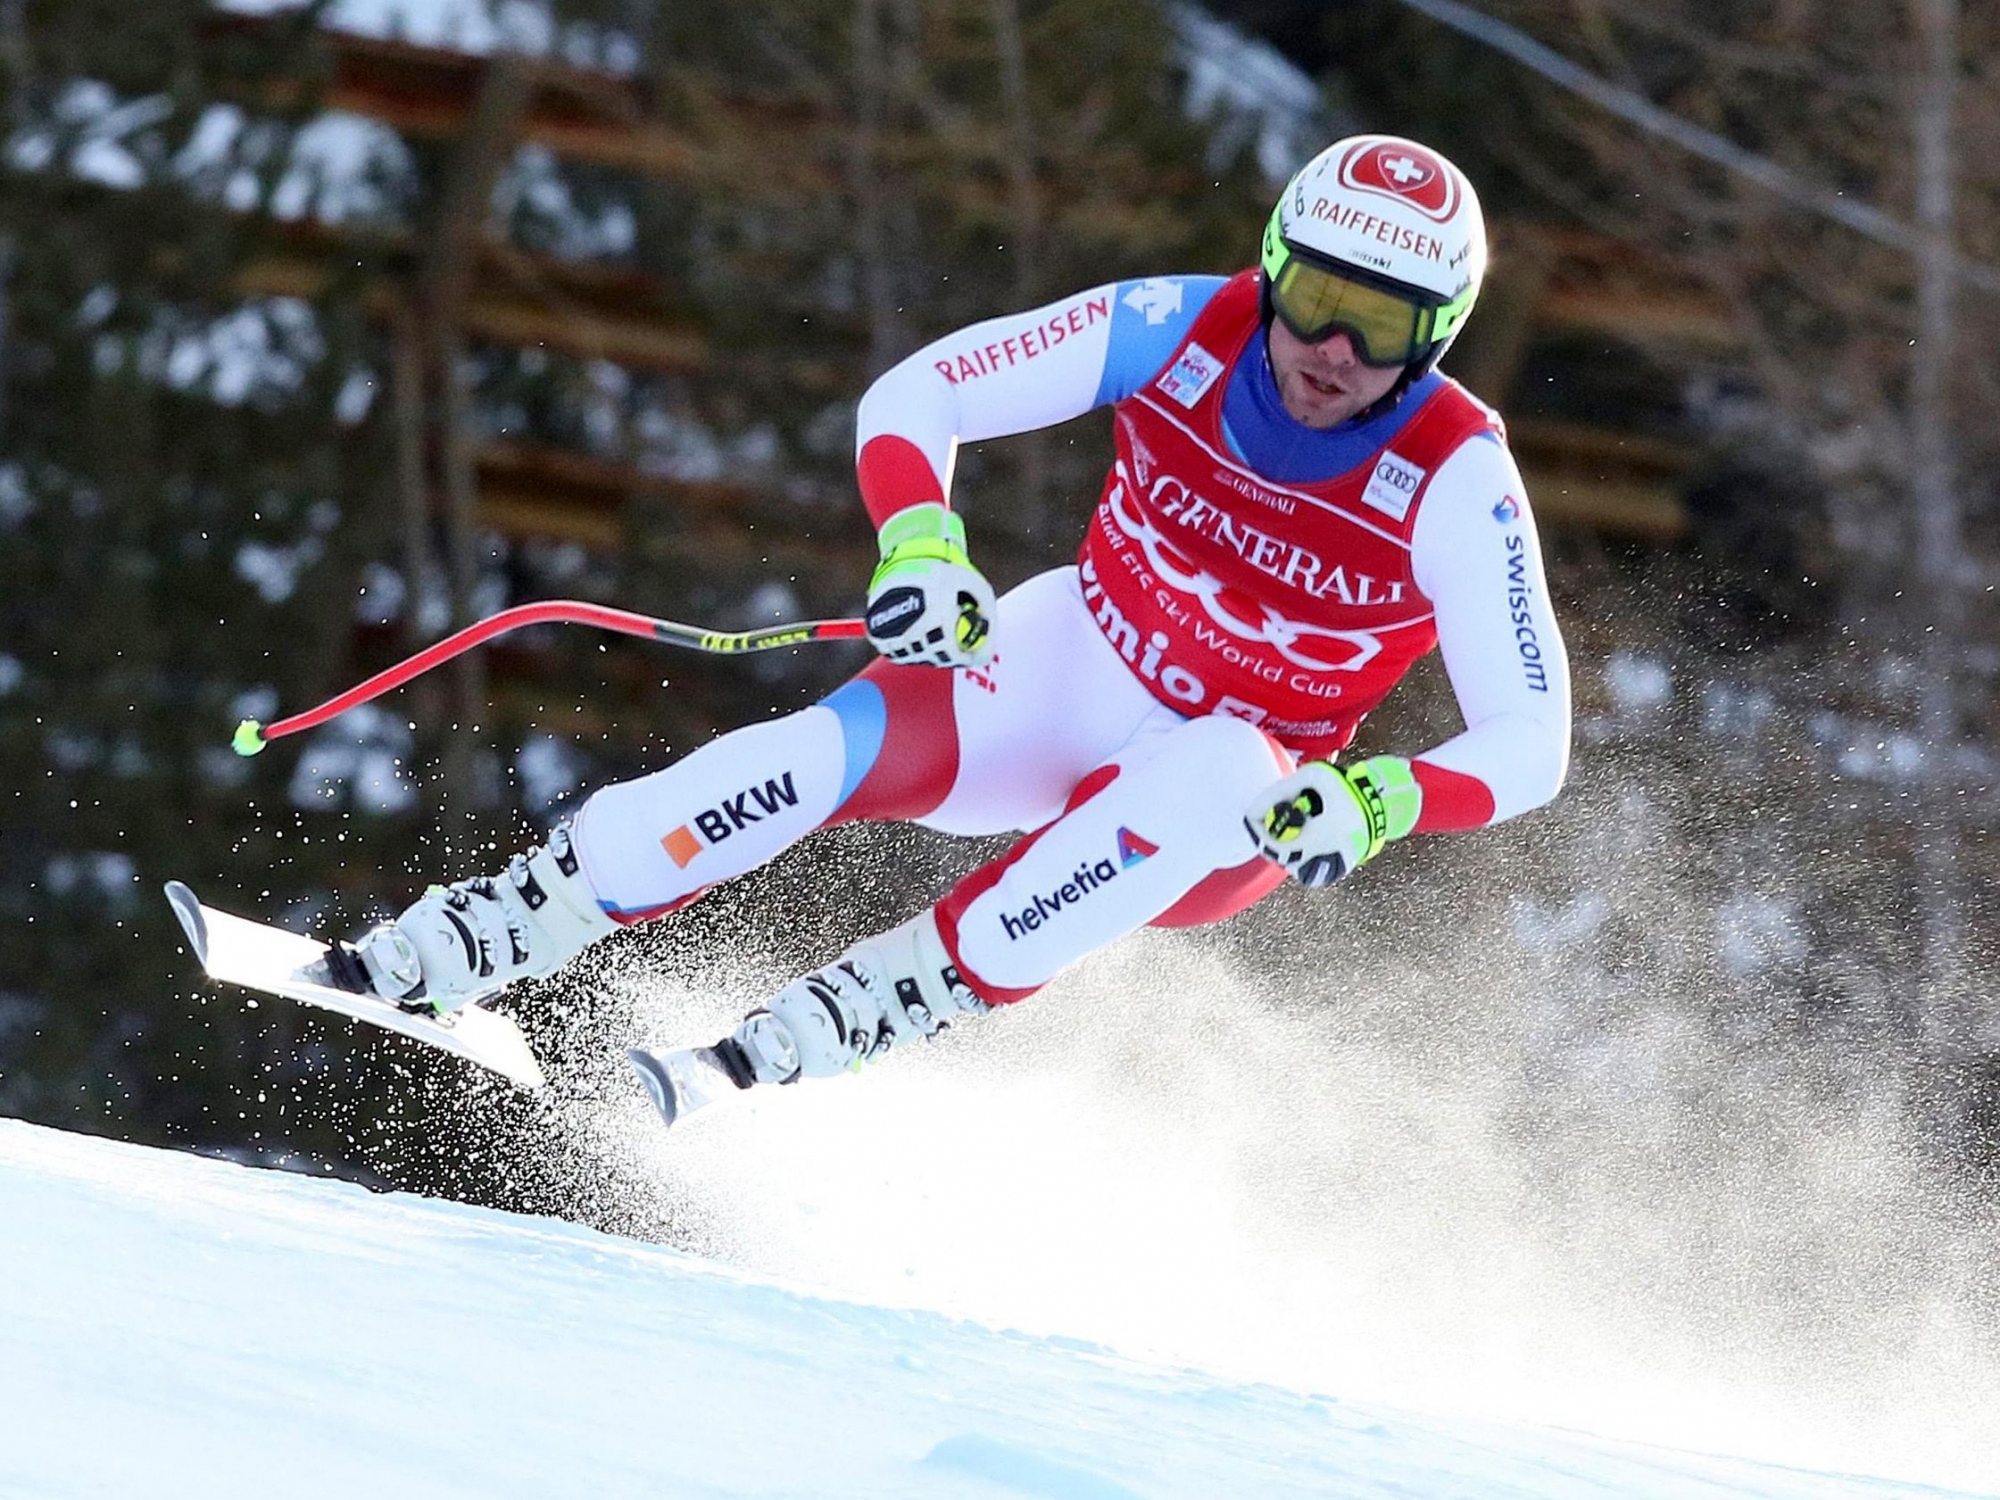 epa07251700 Beat Feuz of Switzerland speeds down the slope during the Men's Downhill race at the FIS Alpine Skiing World Cup event in Bormio, Italy, 28 December 2018.  EPA/ANDREA SOLERO ITALY ALPINE SKIING WORLD CUP